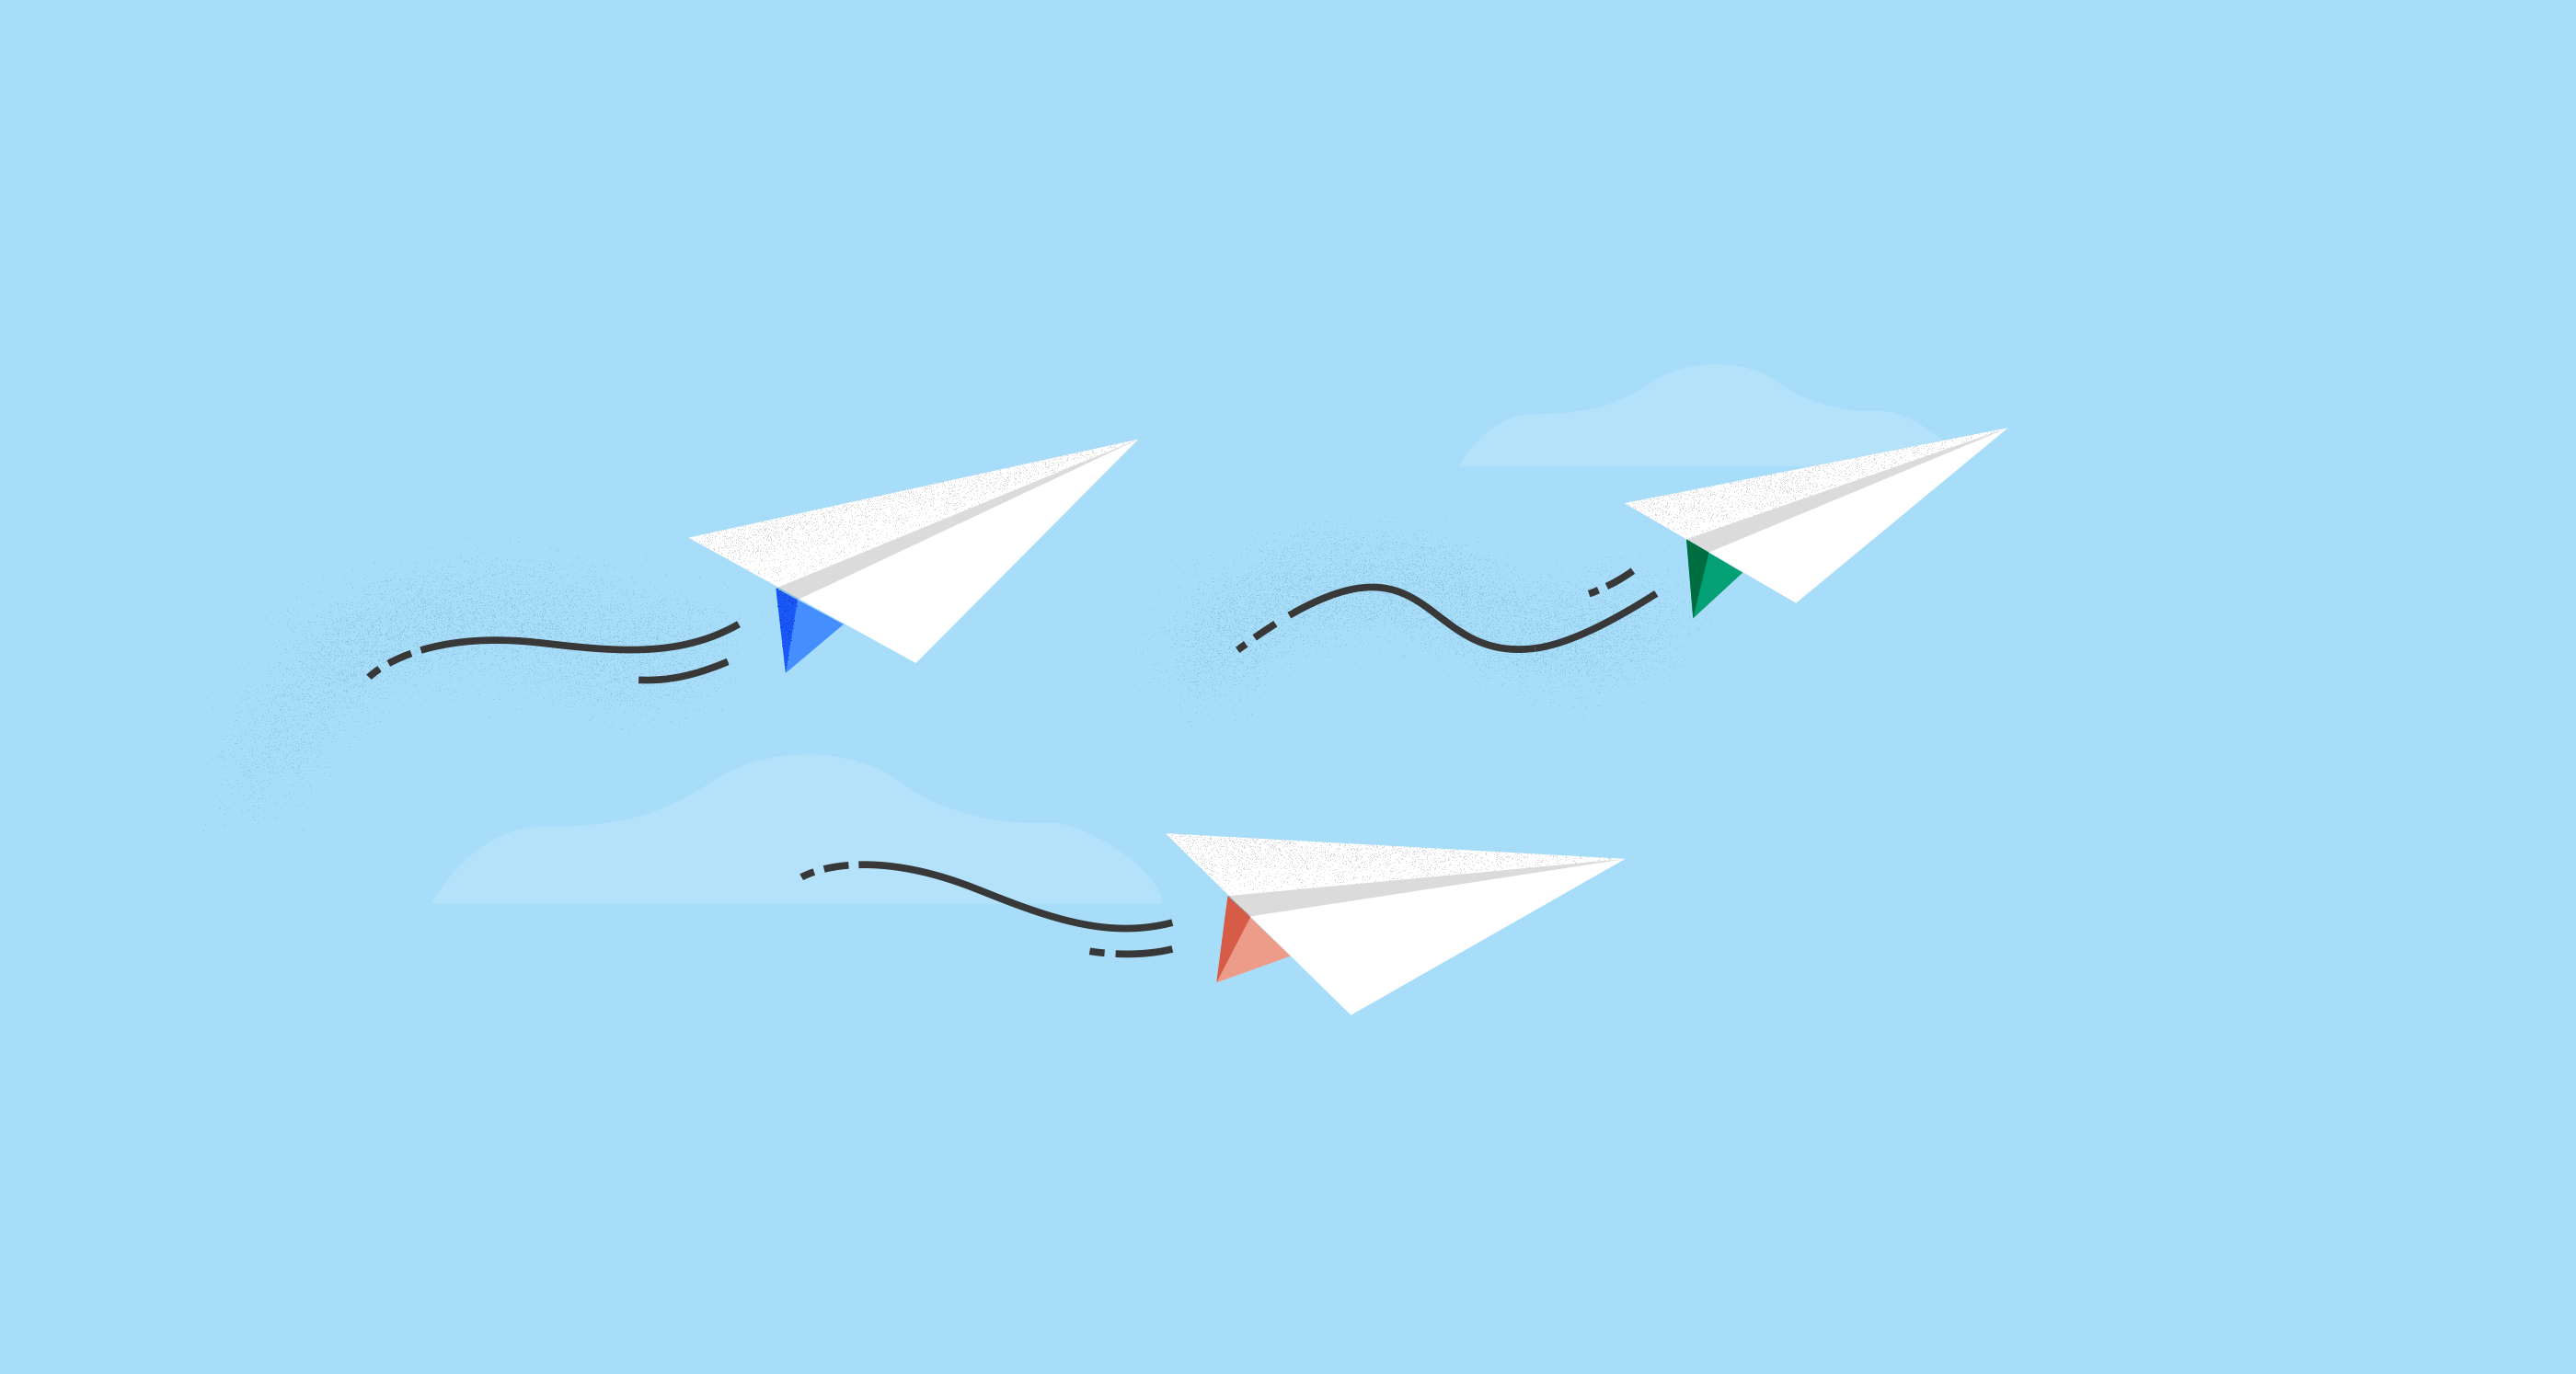 Illustration of 3 paper airplanes